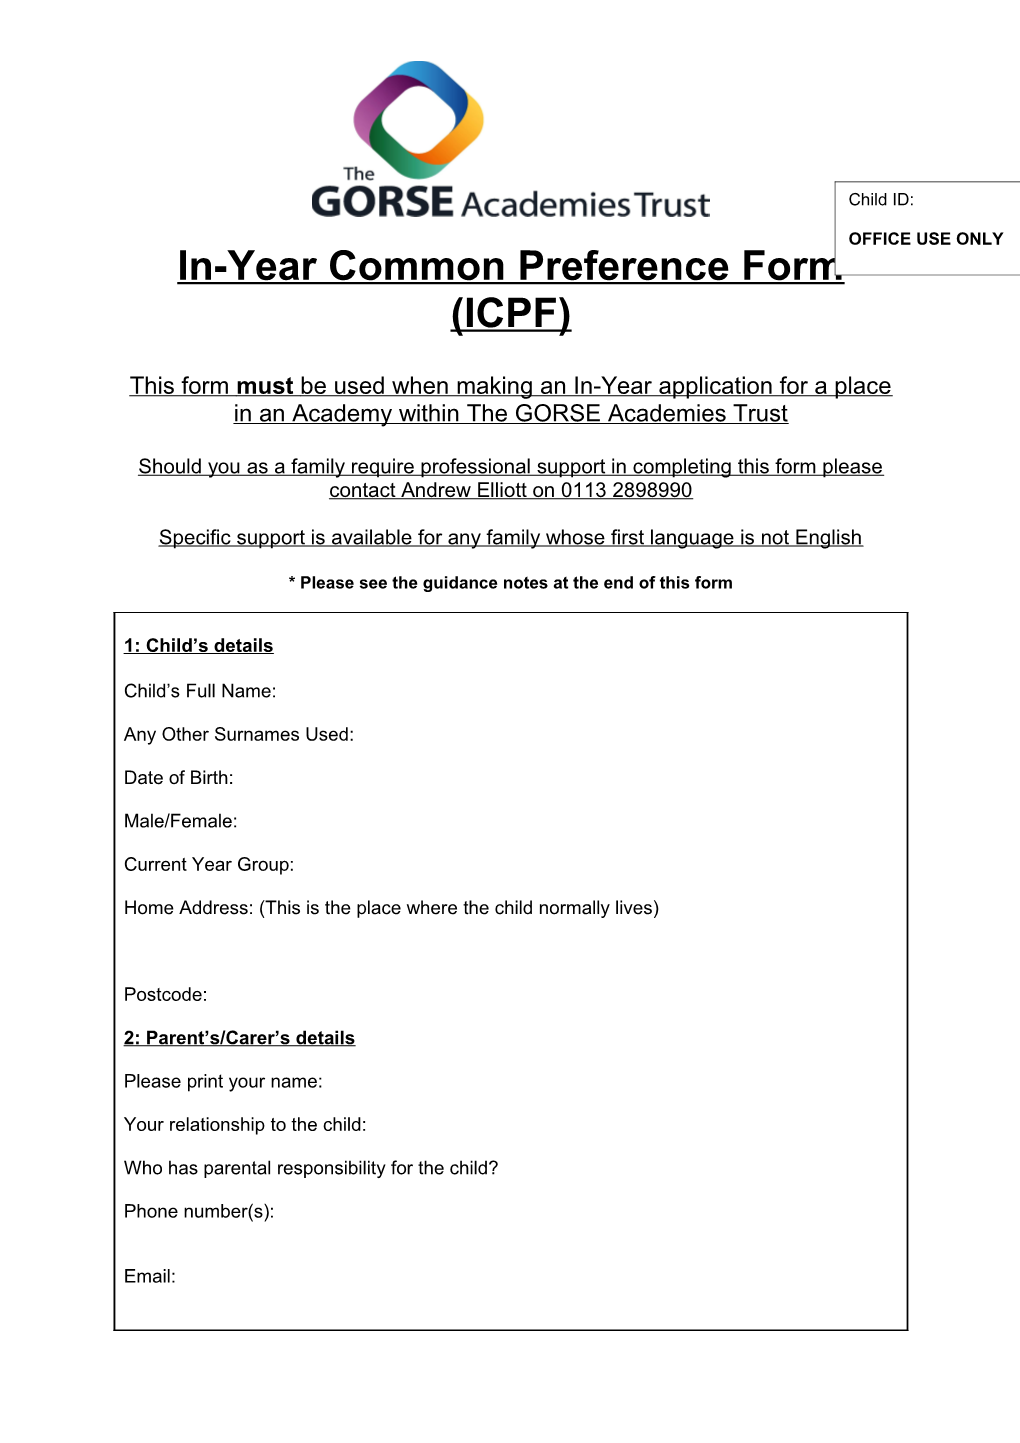 In-Year Common Preference Form (ICPF)